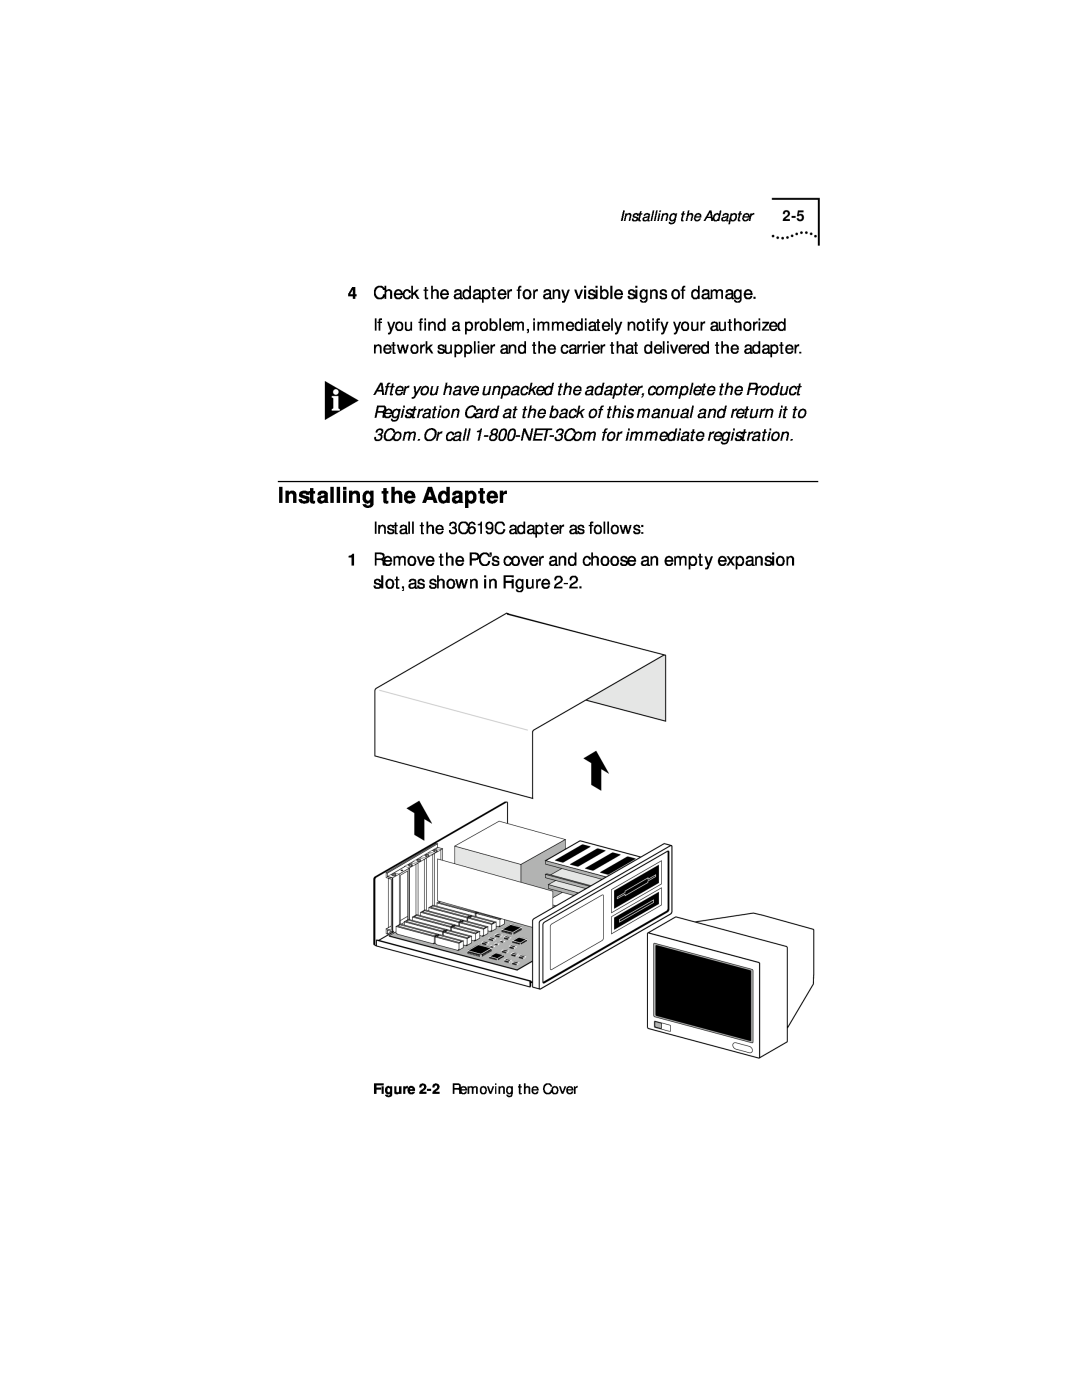 IBM 09-0572-000 manual Installing the Adapter, Check the adapter for any visible signs of damage 